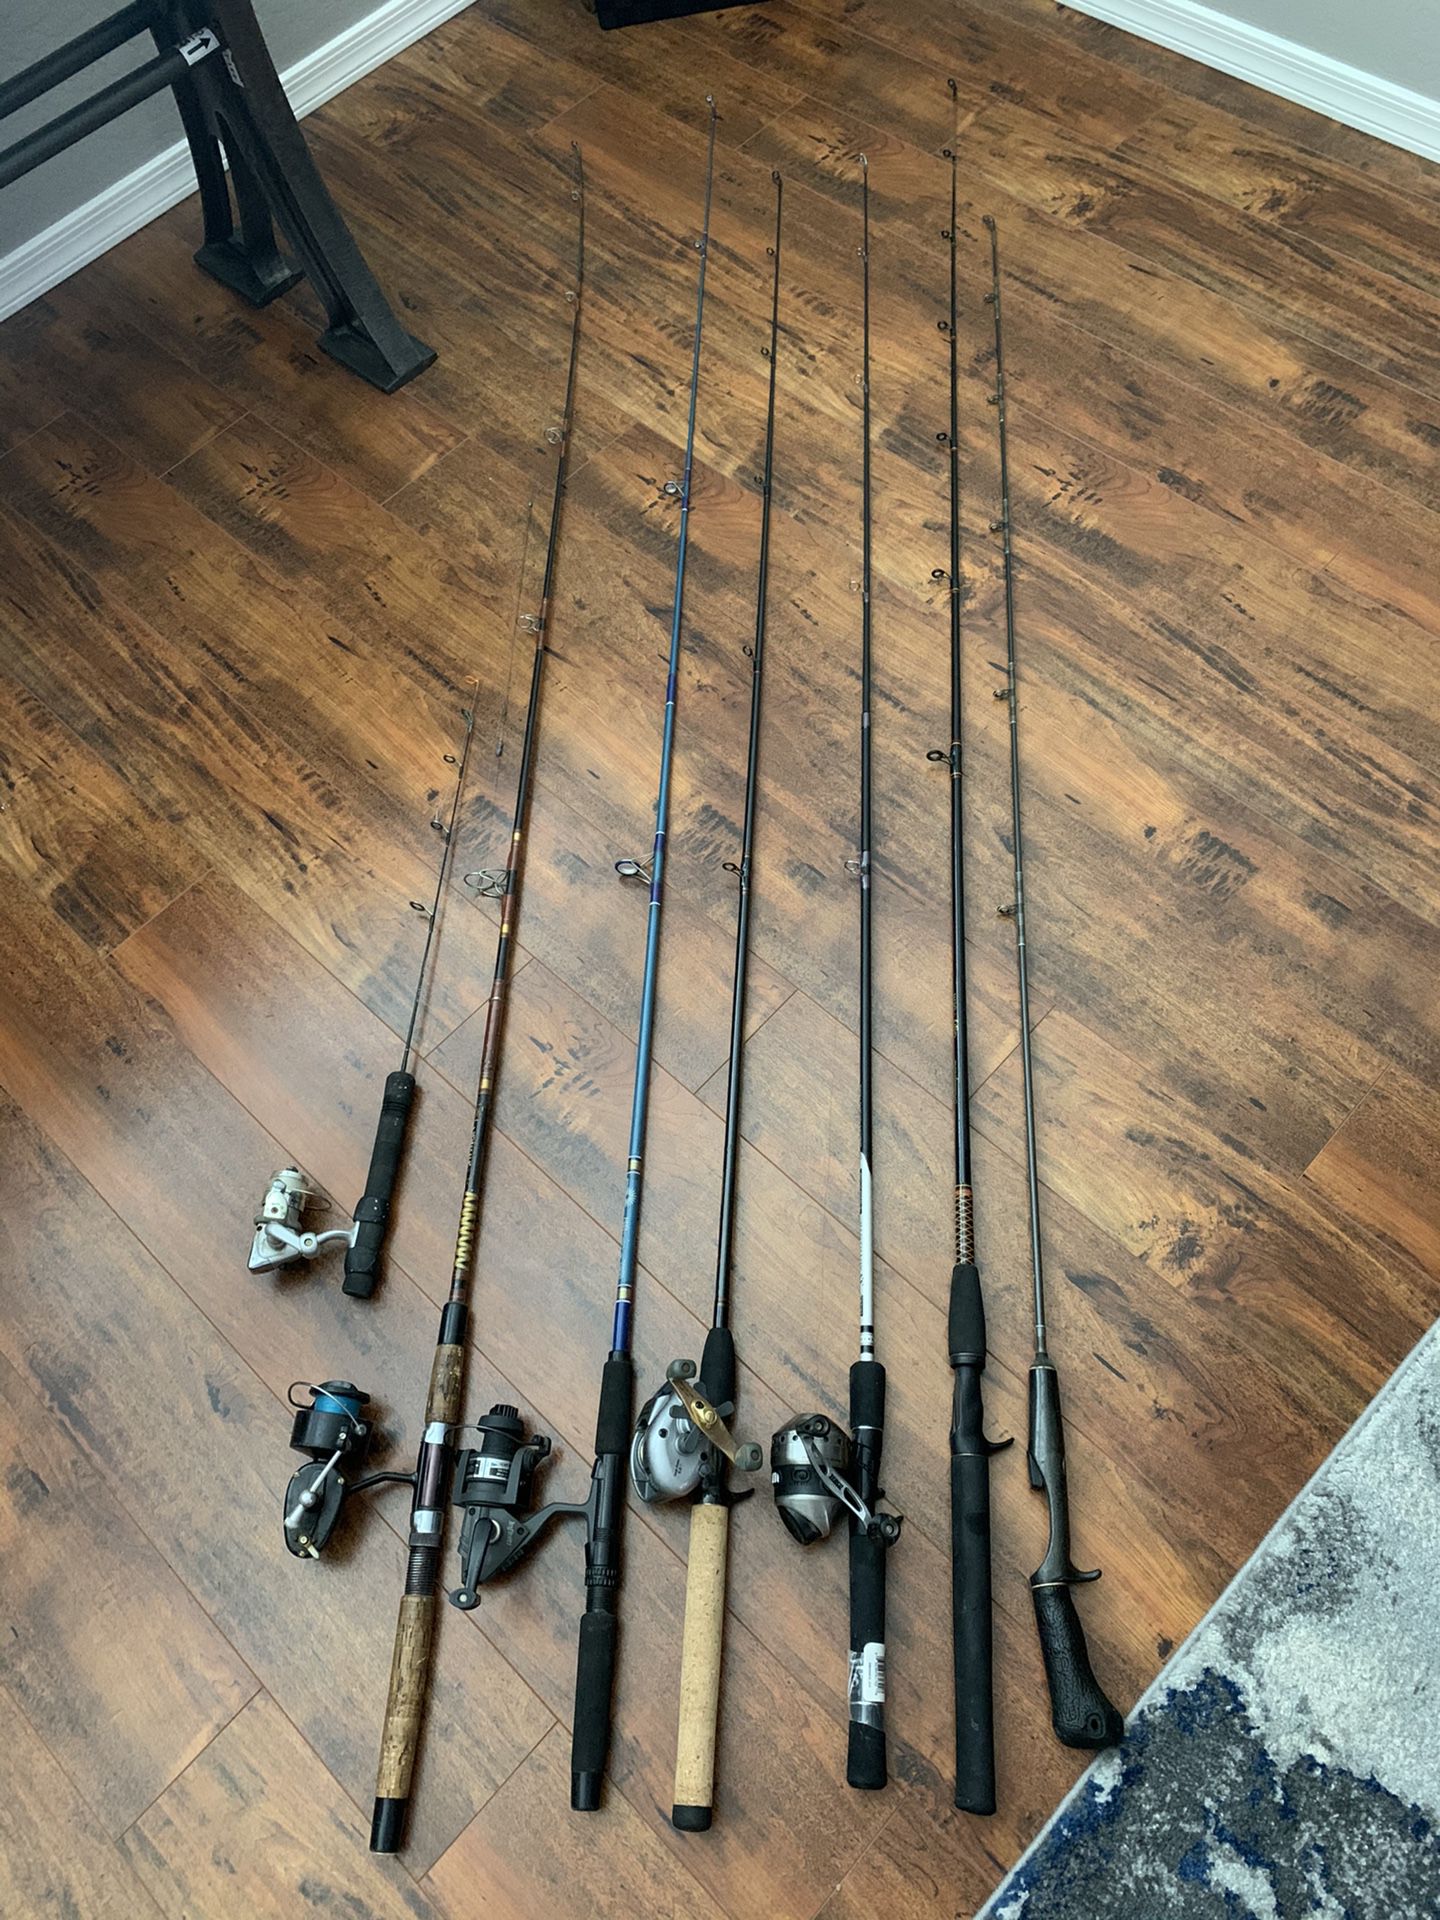 Miscellaneous fishing rods and reels